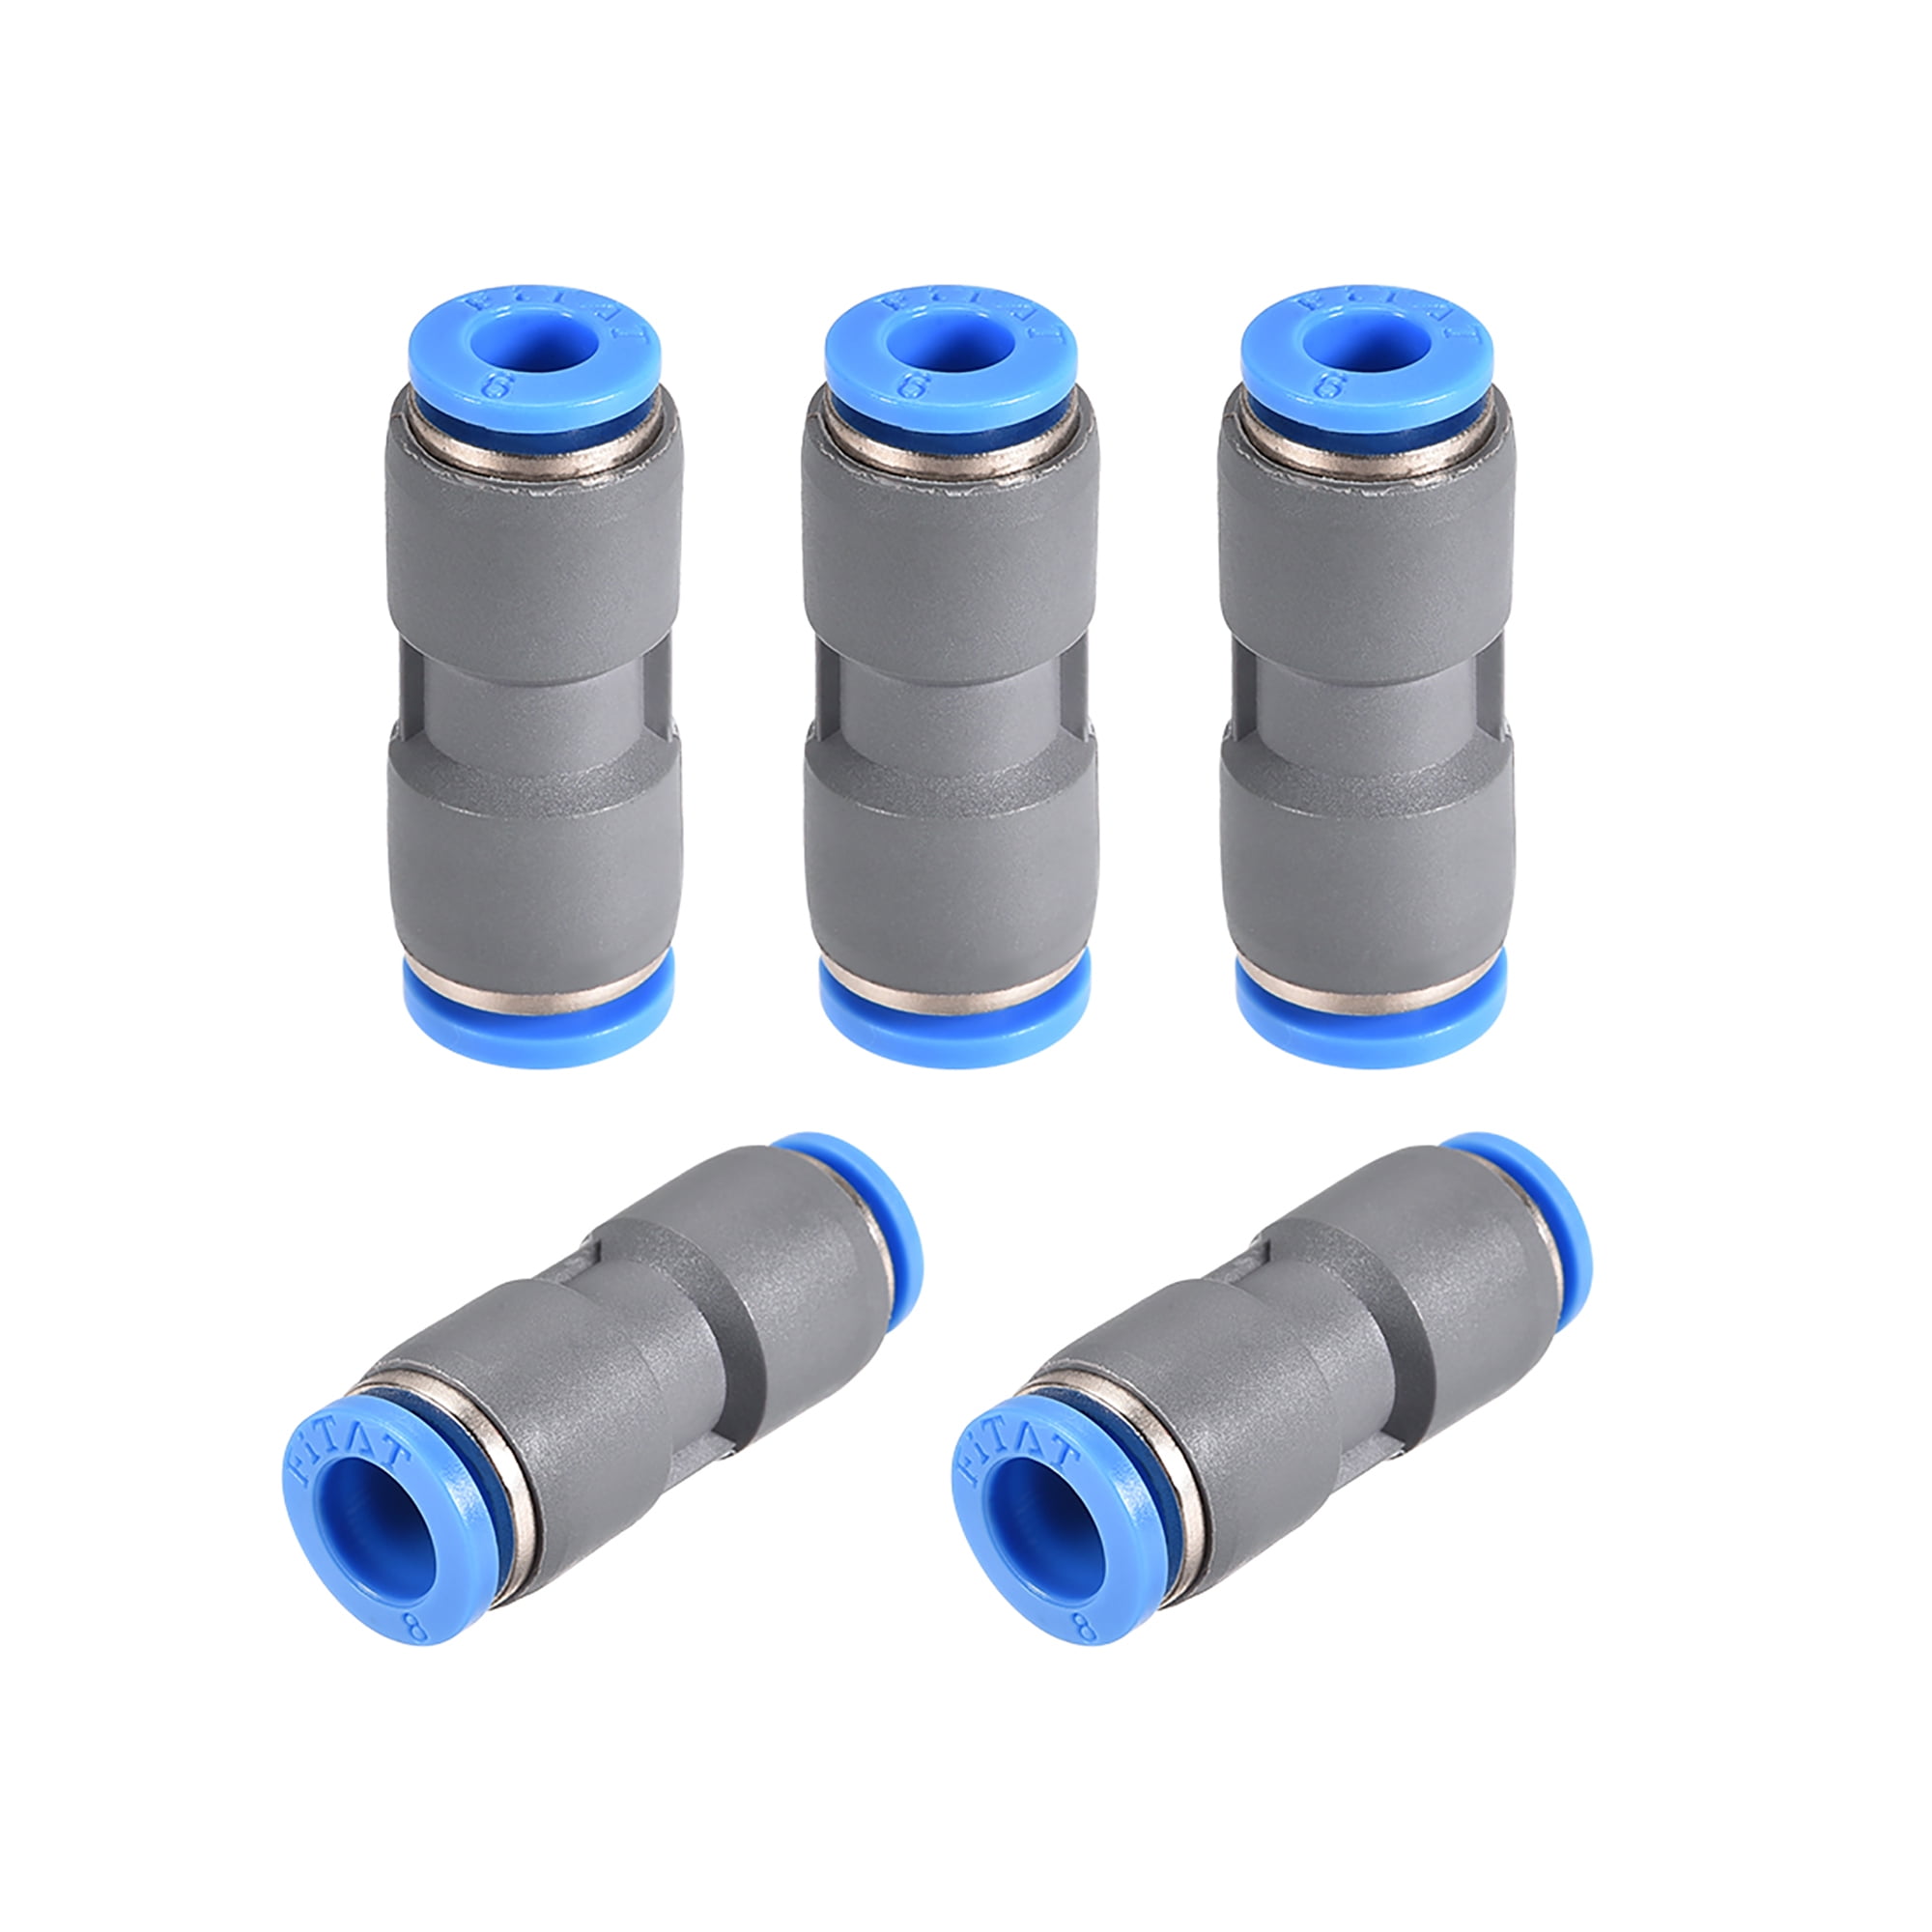 Straight Push Connectors 8mm to 6mm Quick Release Pneumatic Connector Push Release Button Connectors For Telescoping Tubing